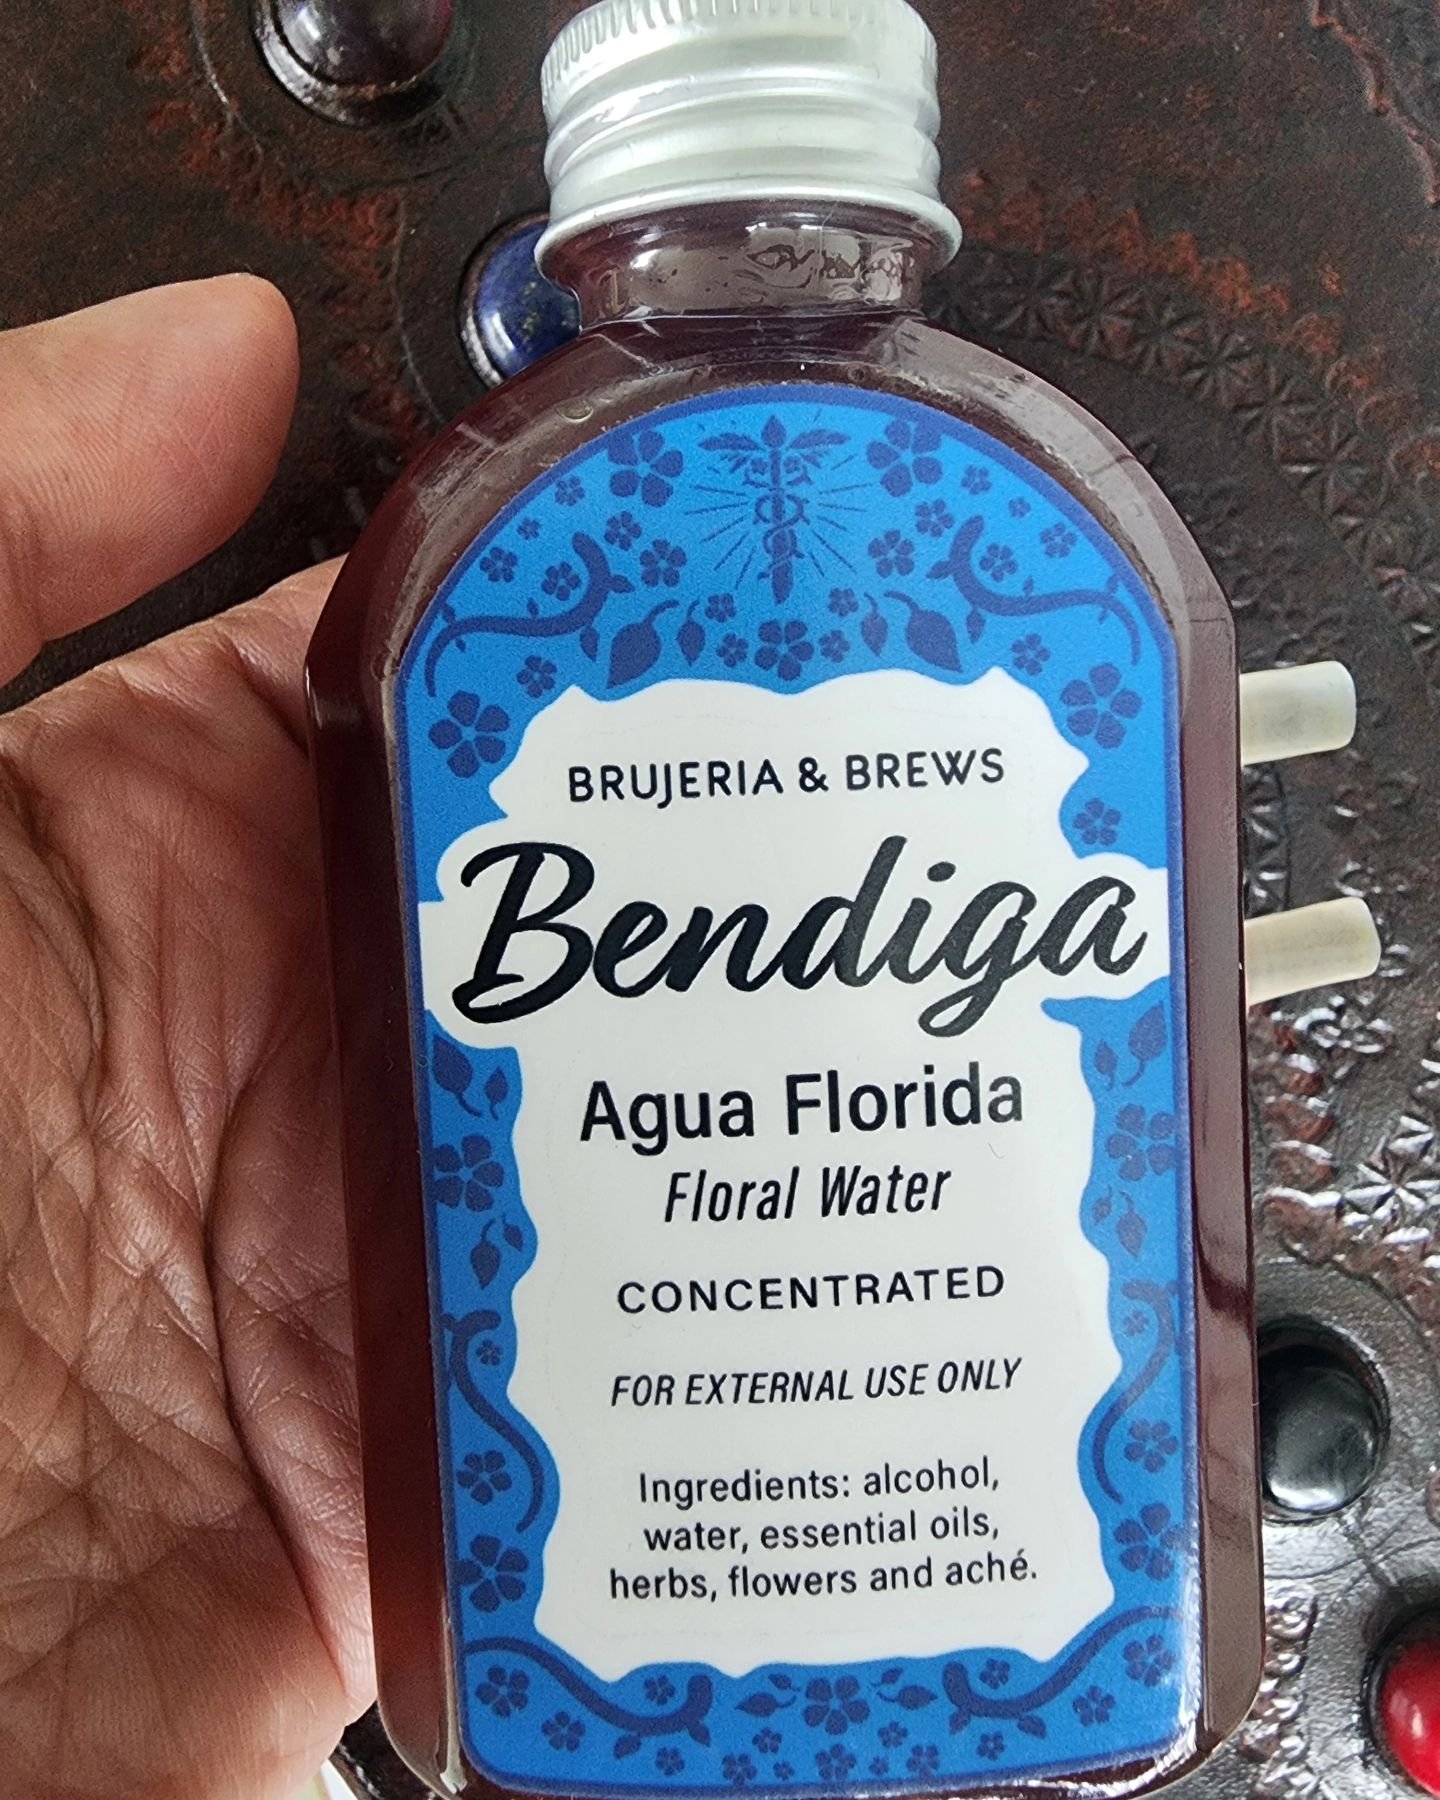 Have you ordered your limited edition Agua Florida yet? What are you waiting for?

#FloridaWater #BrujeriaandBrews